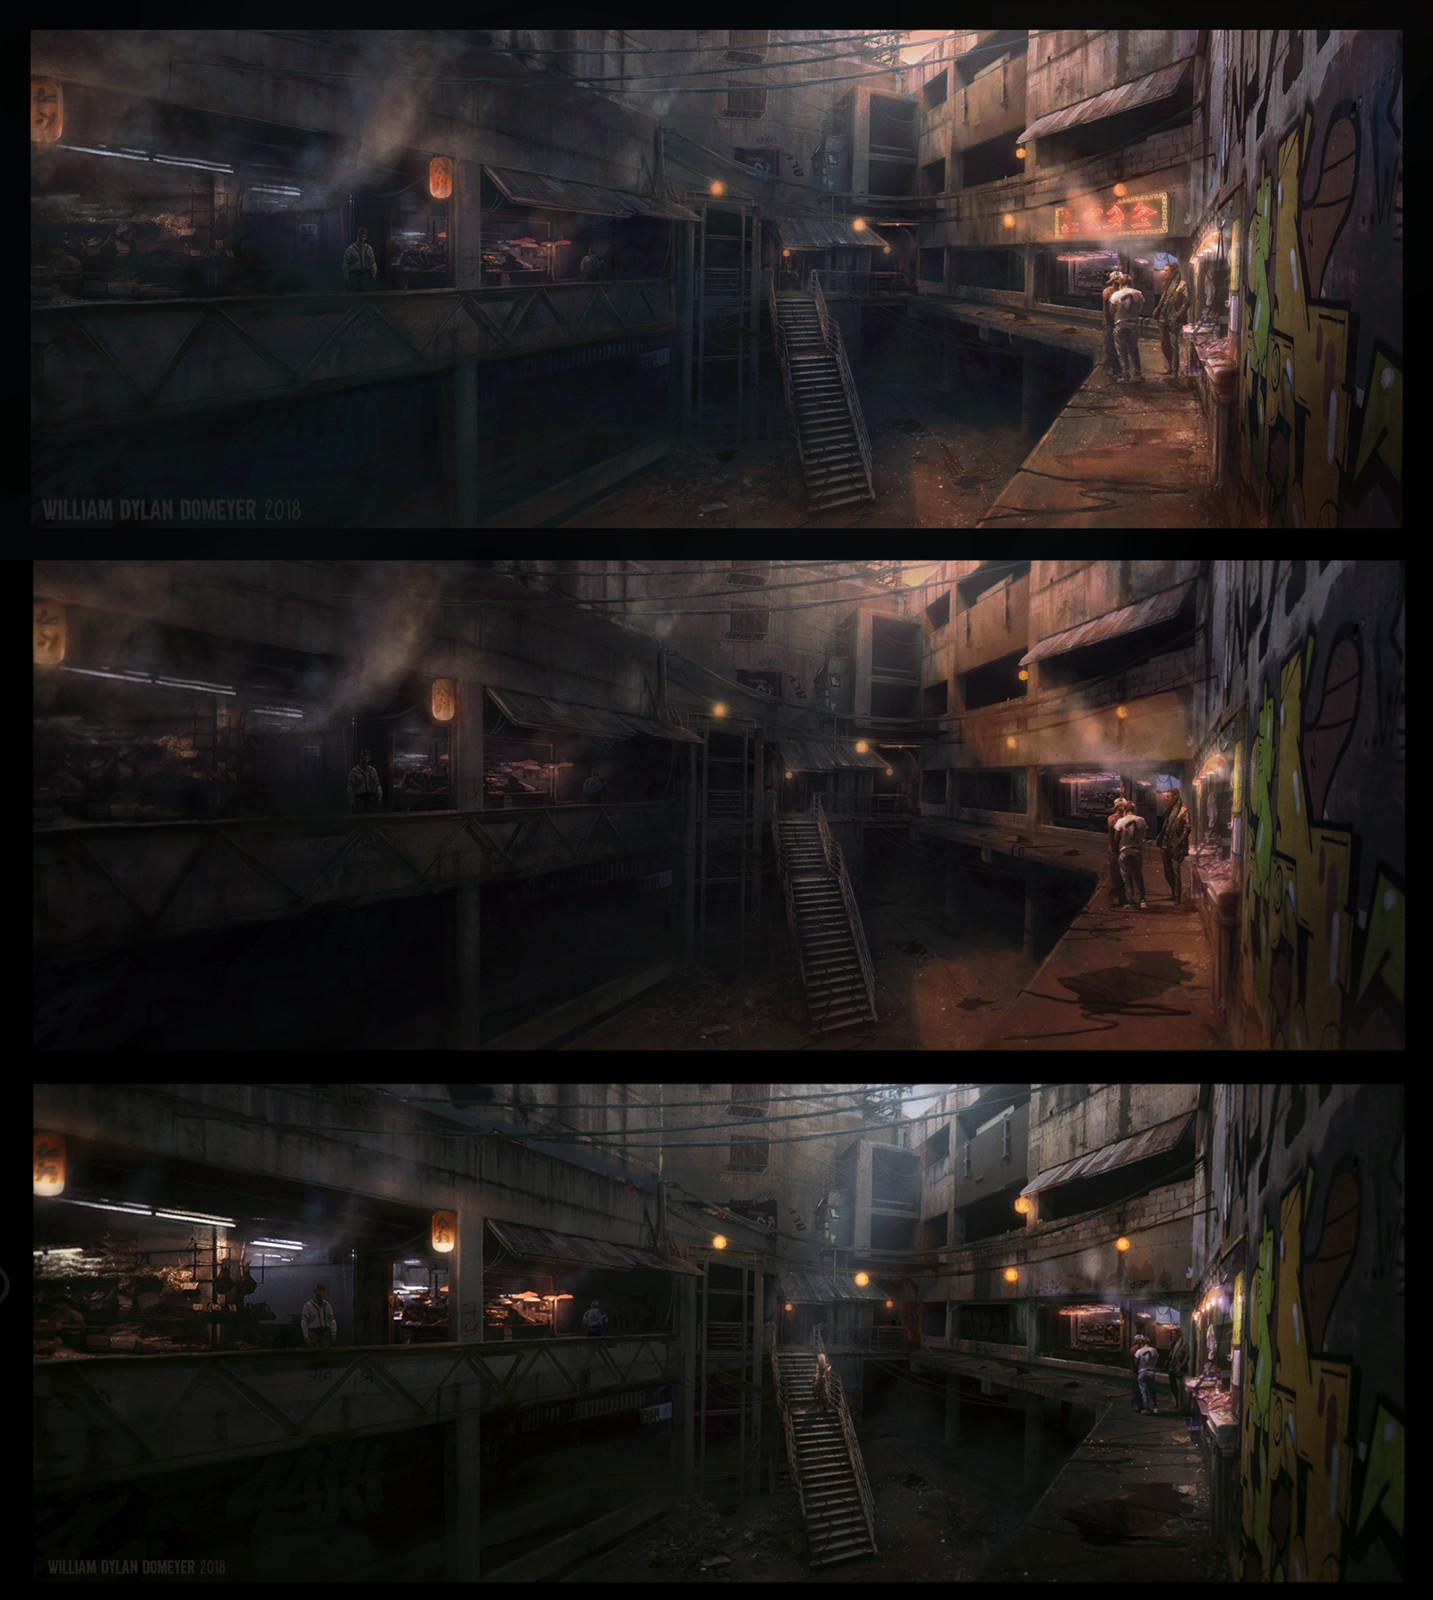 Here's a process pick starting with the original at the bottom the top being the finished rework.